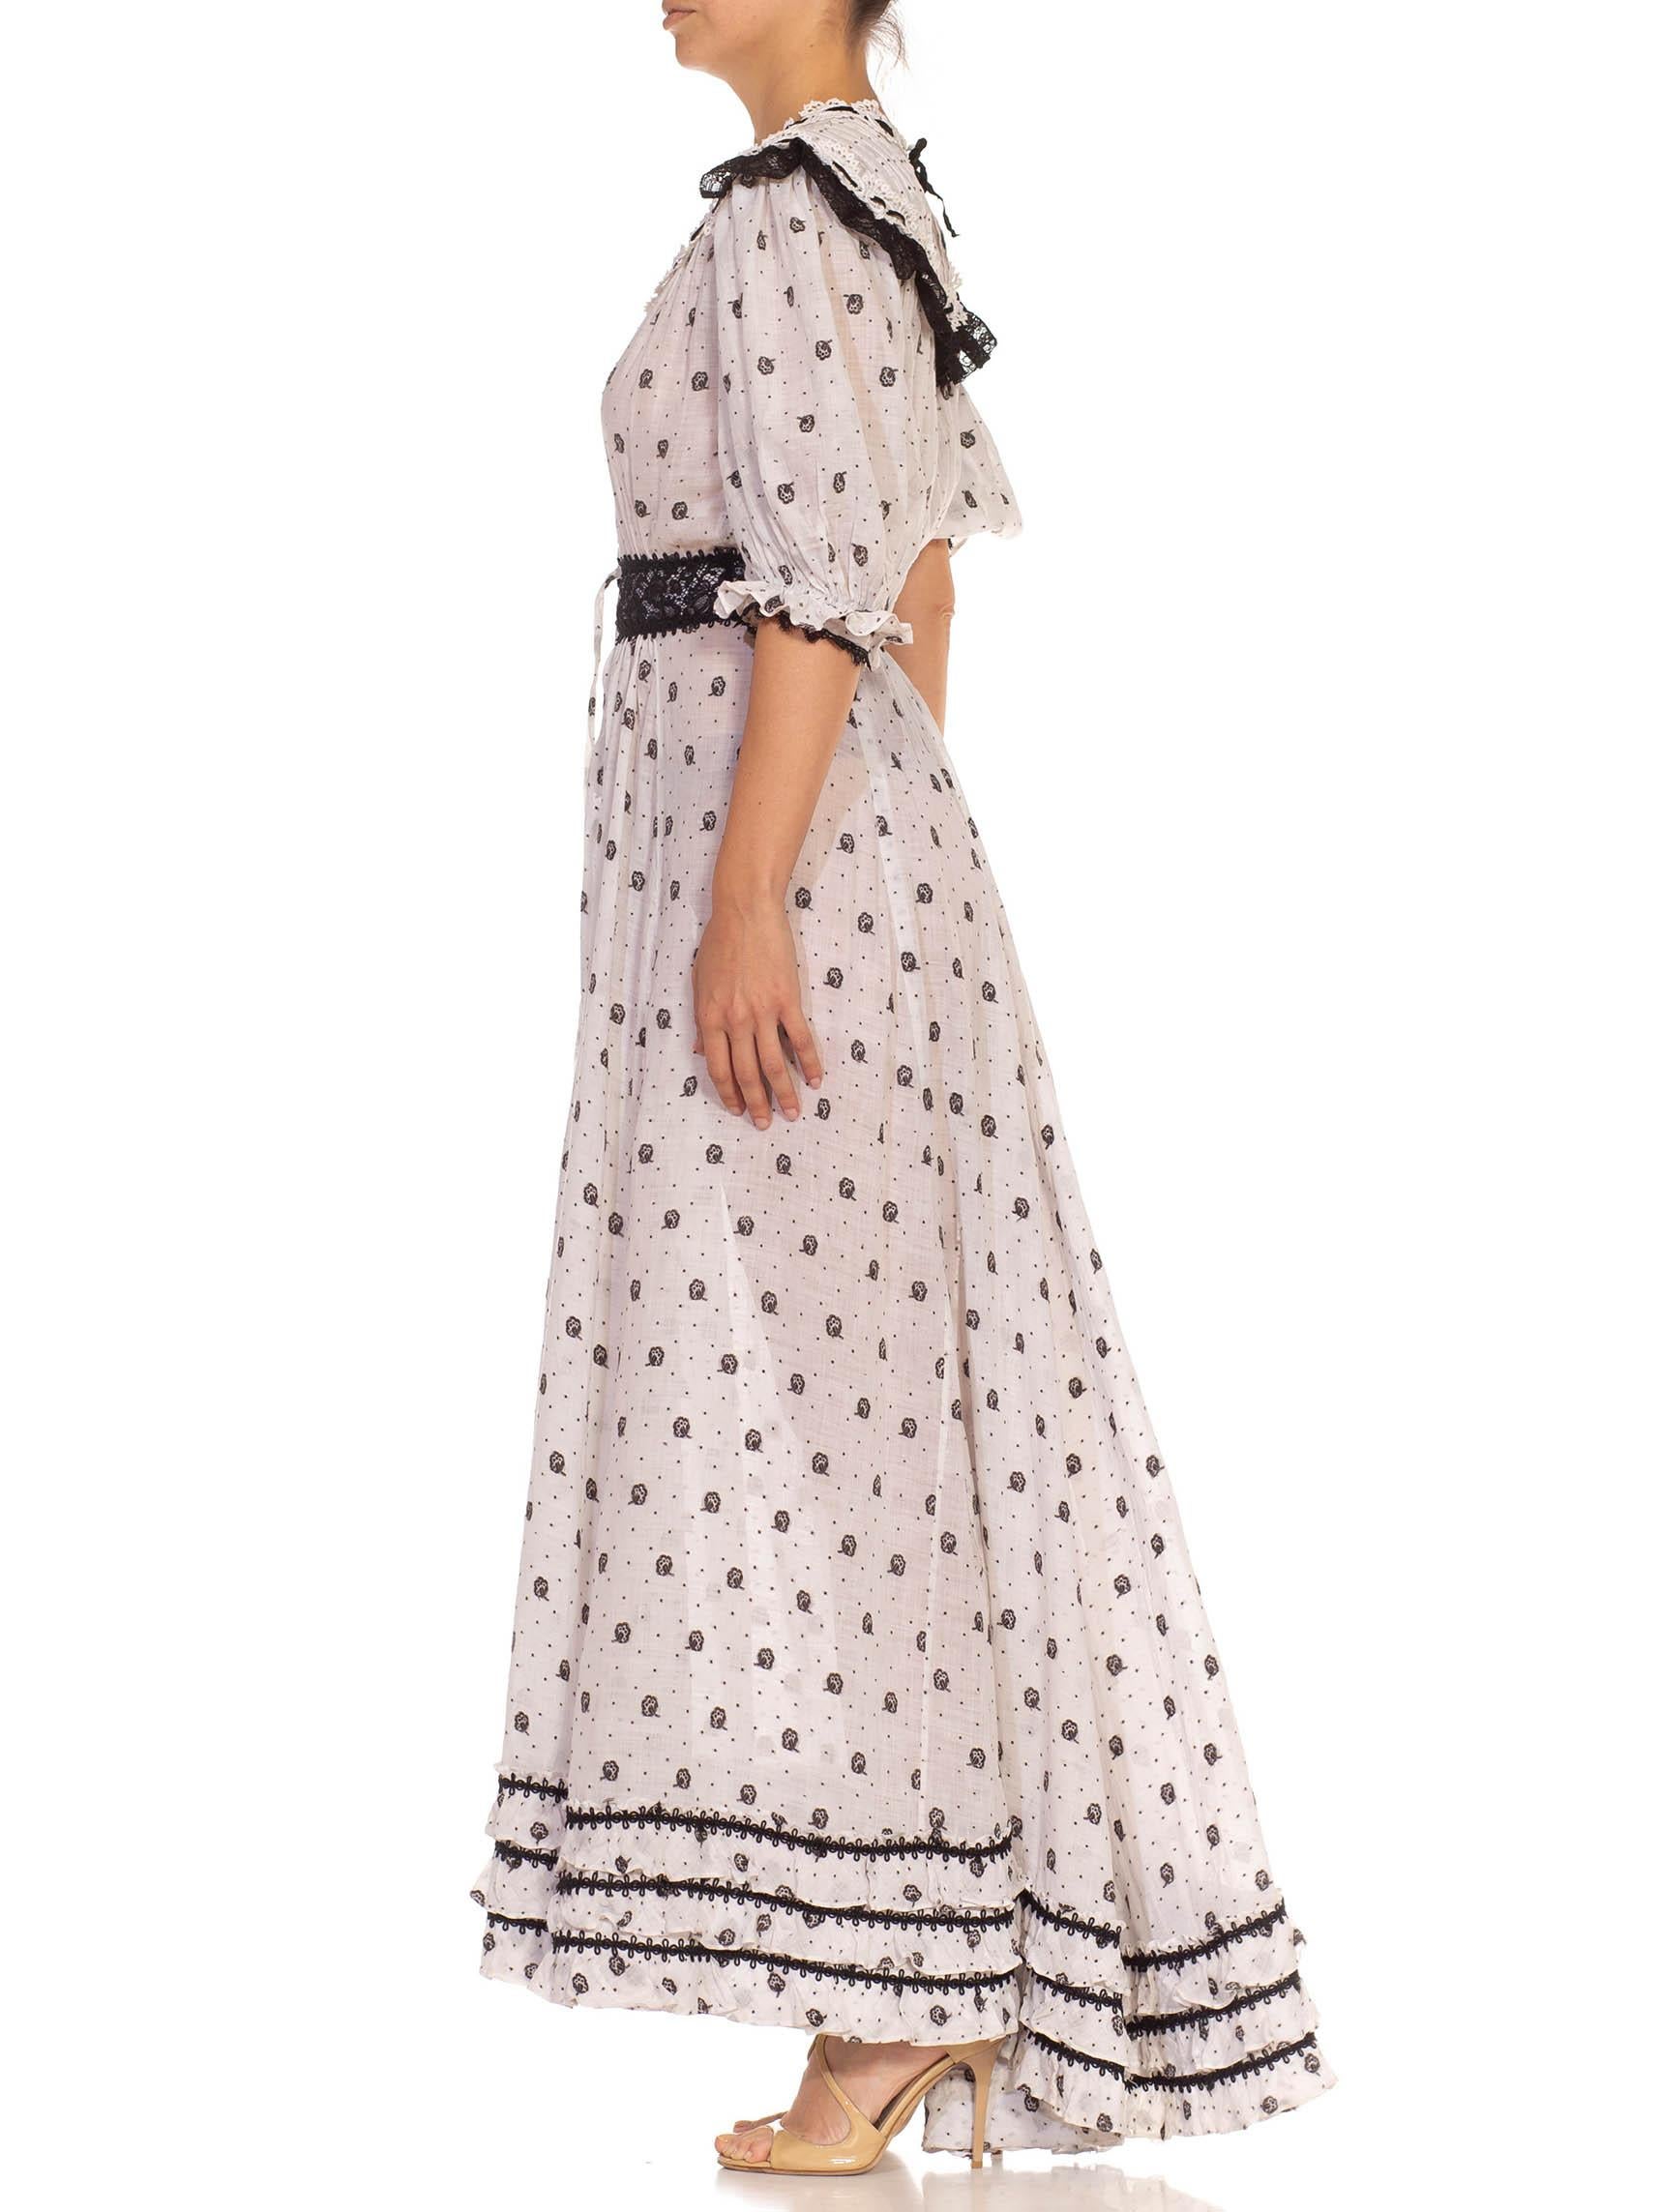 Victorian Morphew Collection White & Black Organic Cotton Velvet Ribbon Trim Dress
MORPHEW COLLECTION is made entirely by hand in our NYC Ateliér of rare antique materials sourced from around the globe. Our sustainable vintage materials represent